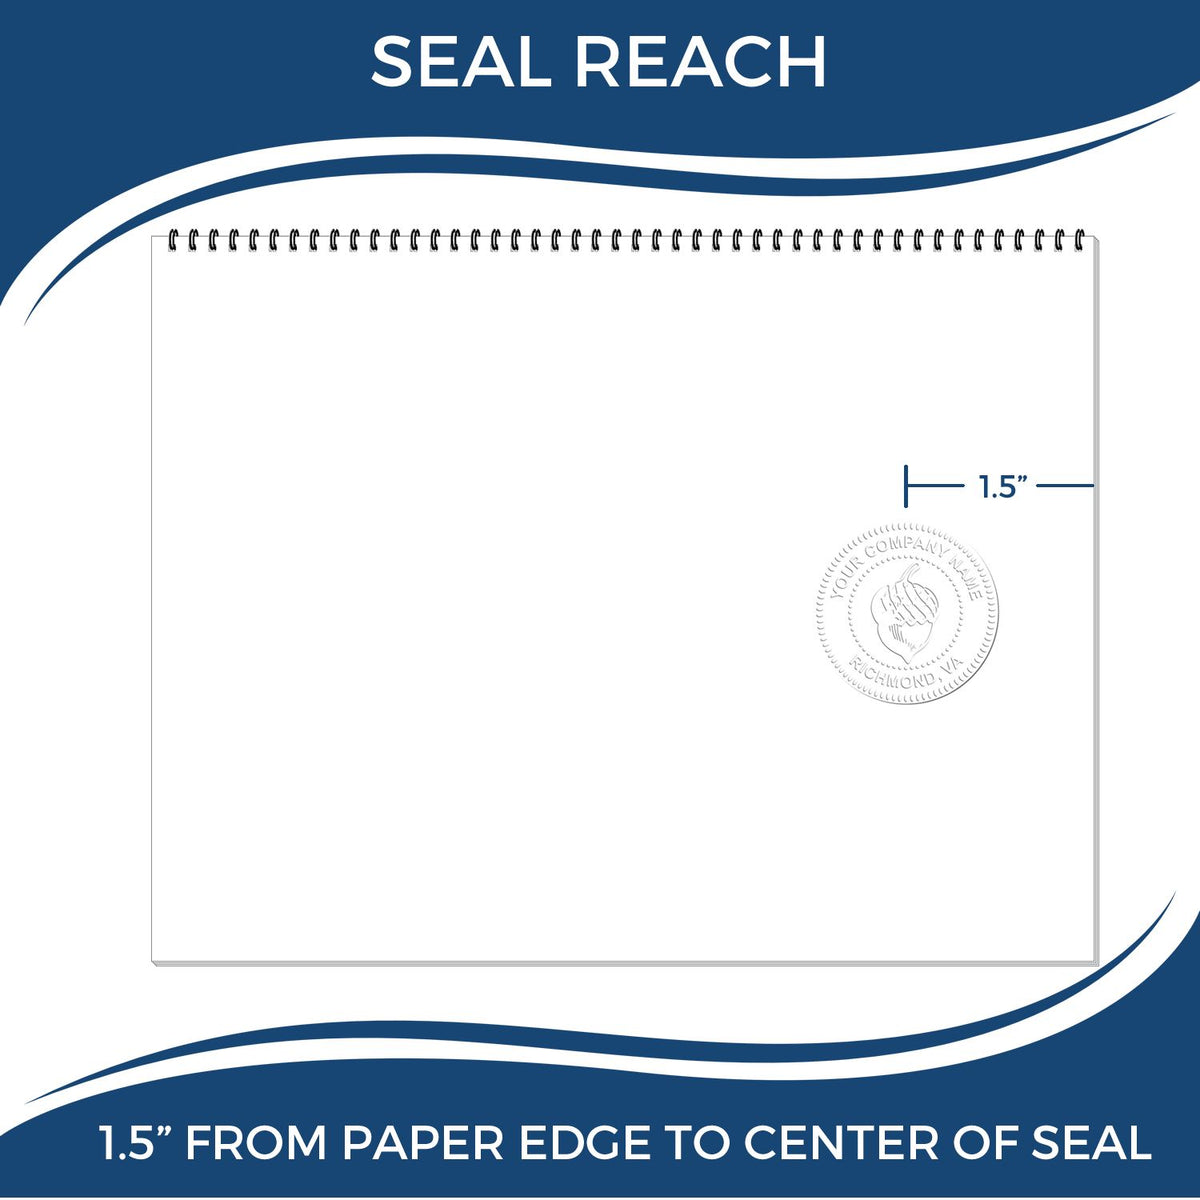 An infographic showing the seal reach which is represented by a ruler and a miniature seal image of the Hybrid Michigan Geologist Seal